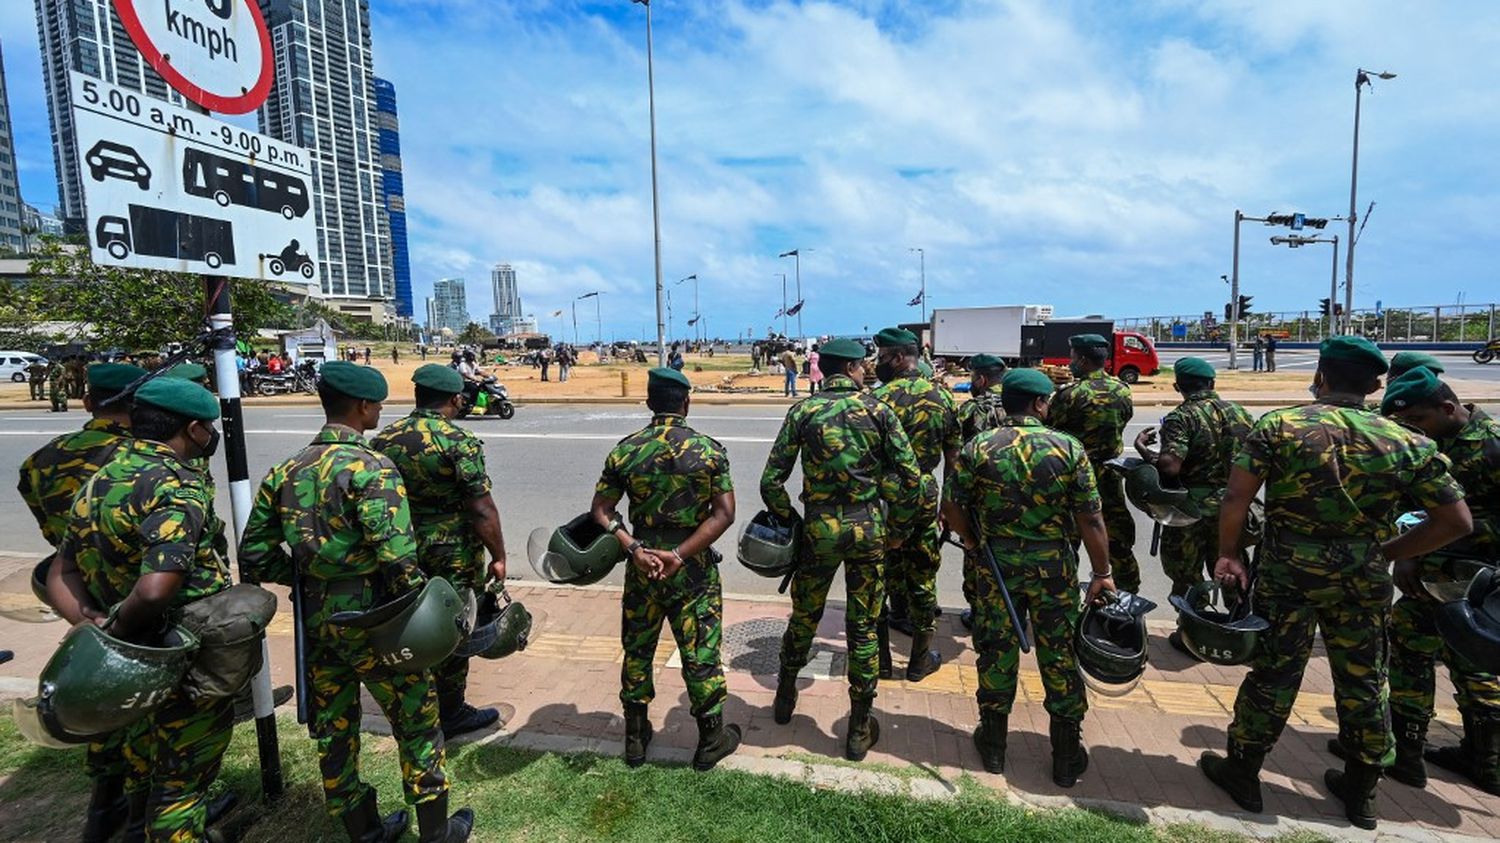 Sri Lanka: President announces lifting of state of emergency this week
